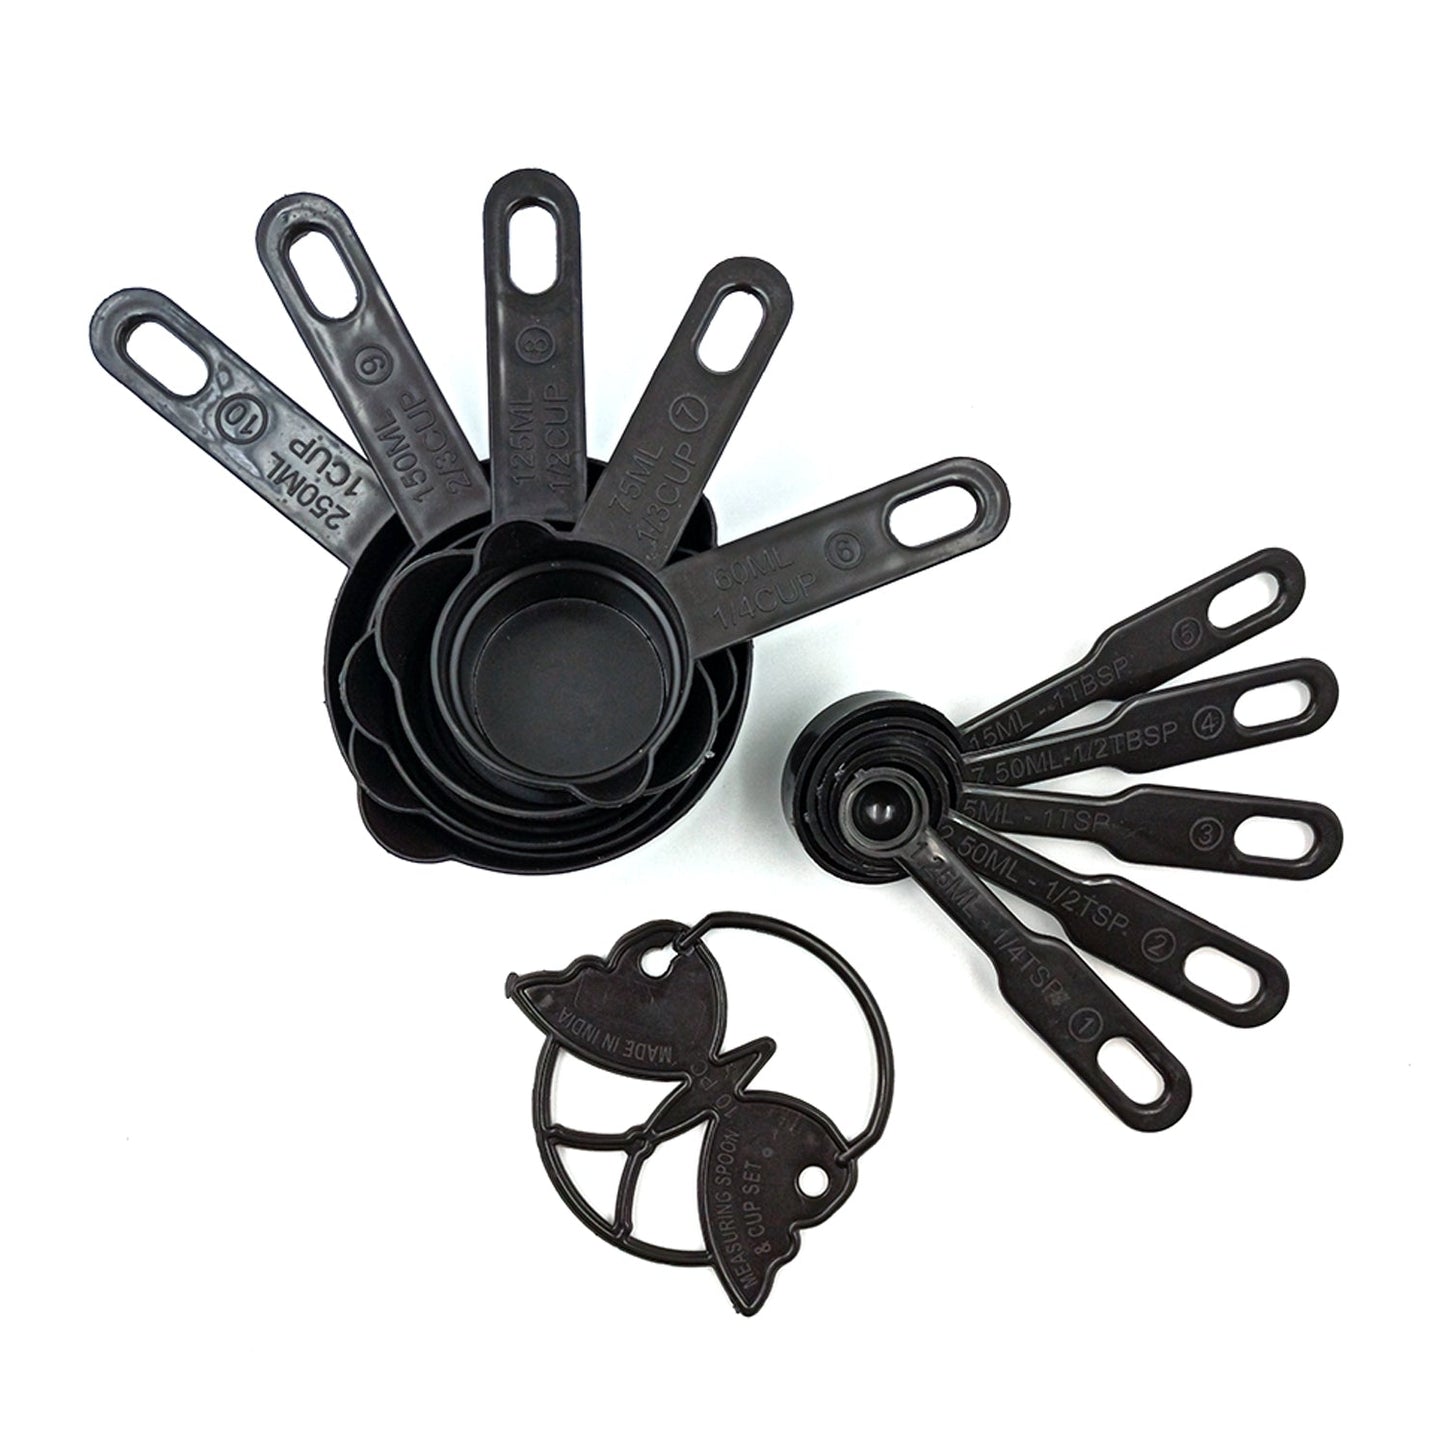 2646 Plastic Measuring Cups and Spoons (11 Pcs, Black) With butterfly shape Holder - SWASTIK CREATIONS The Trend Point SWASTIK CREATIONS The Trend Point